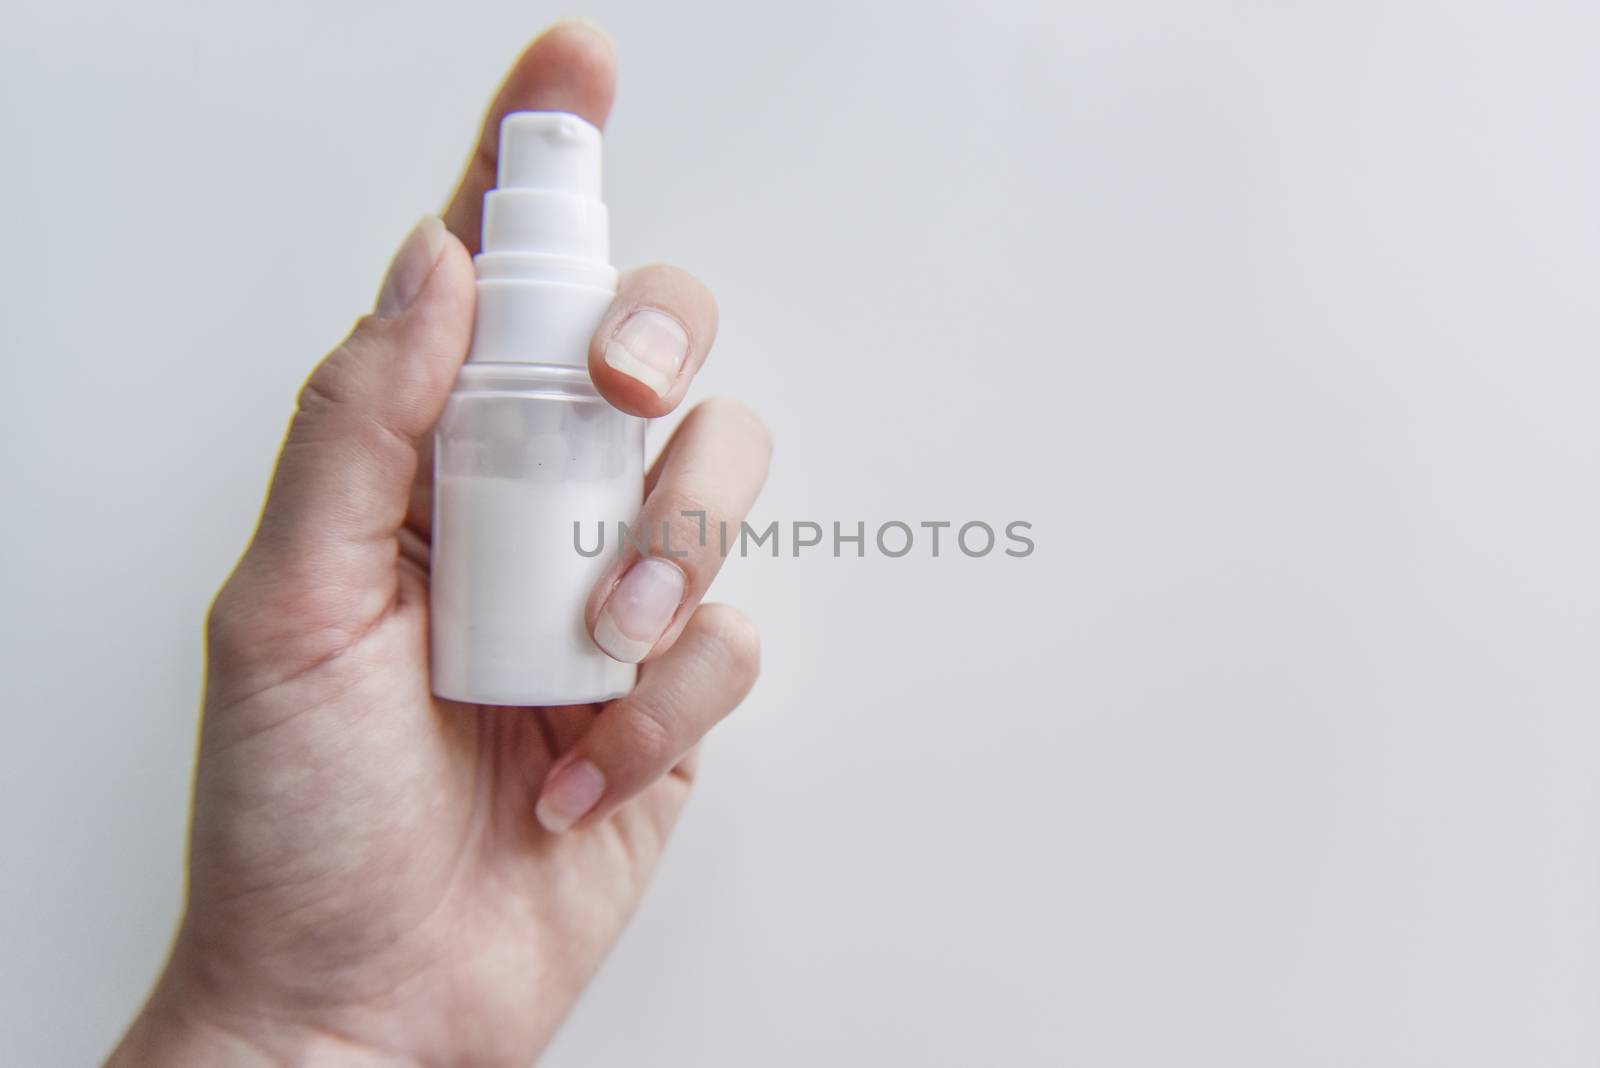 holding in hand the tube with some white liquid in it, cosmedics and hygene concept